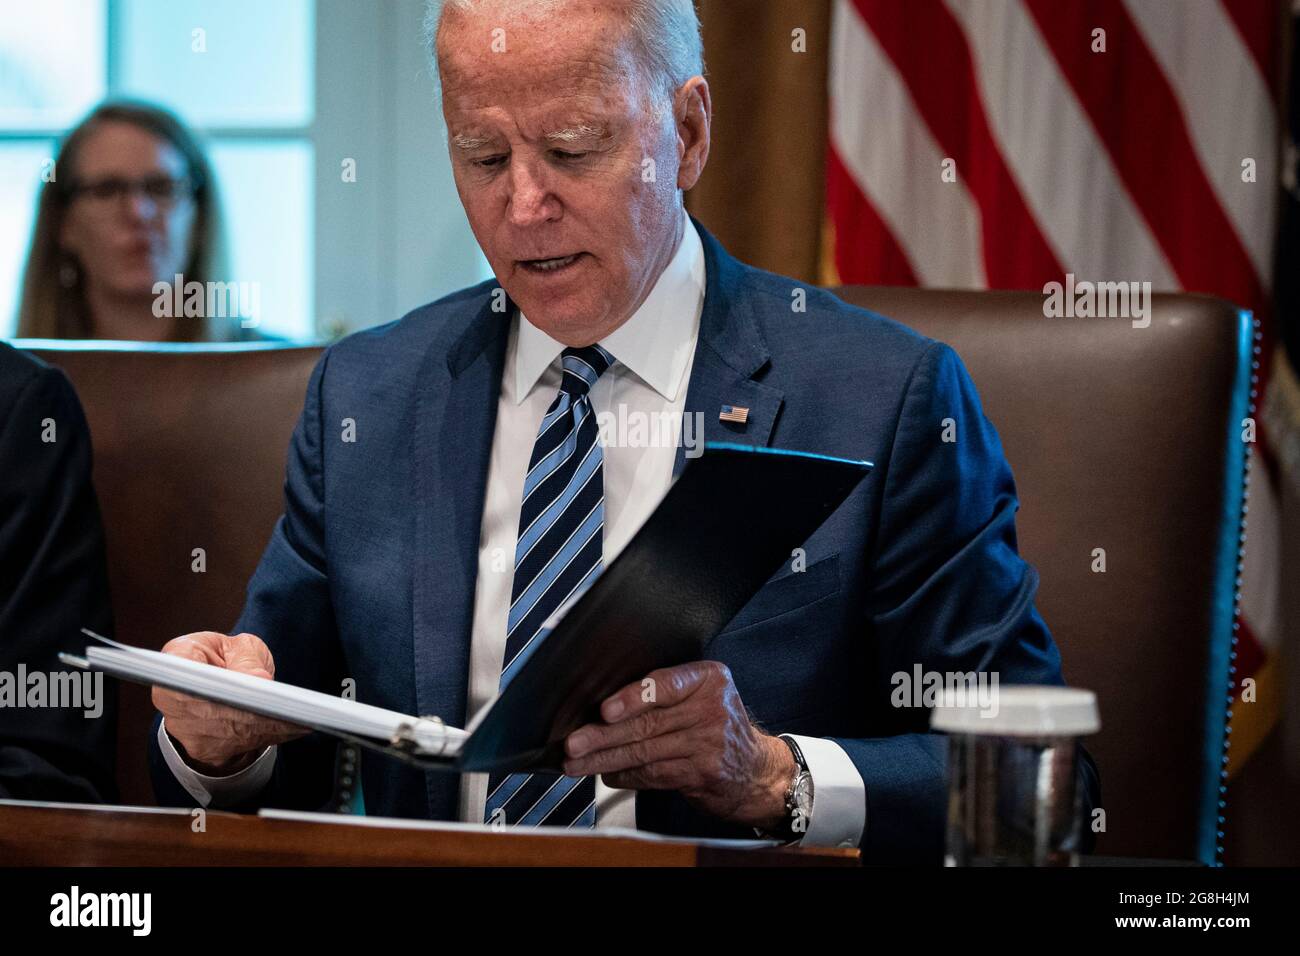 Washington, USA. 20th July, 2021. U.S. President Joe Biden looks over his notes during a cabinet meeting at the White House in Washington, DC, U.S., on Tuesday, July 20, 2021. Biden administration officials say they're starting to see signs of relief for the global semiconductor supply shortage, including commitments from manufacturers to make more automotive-grade chips for car companies. Photographer: Al Drago/Pool/Sipa USA Credit: Sipa USA/Alamy Live News Stock Photo